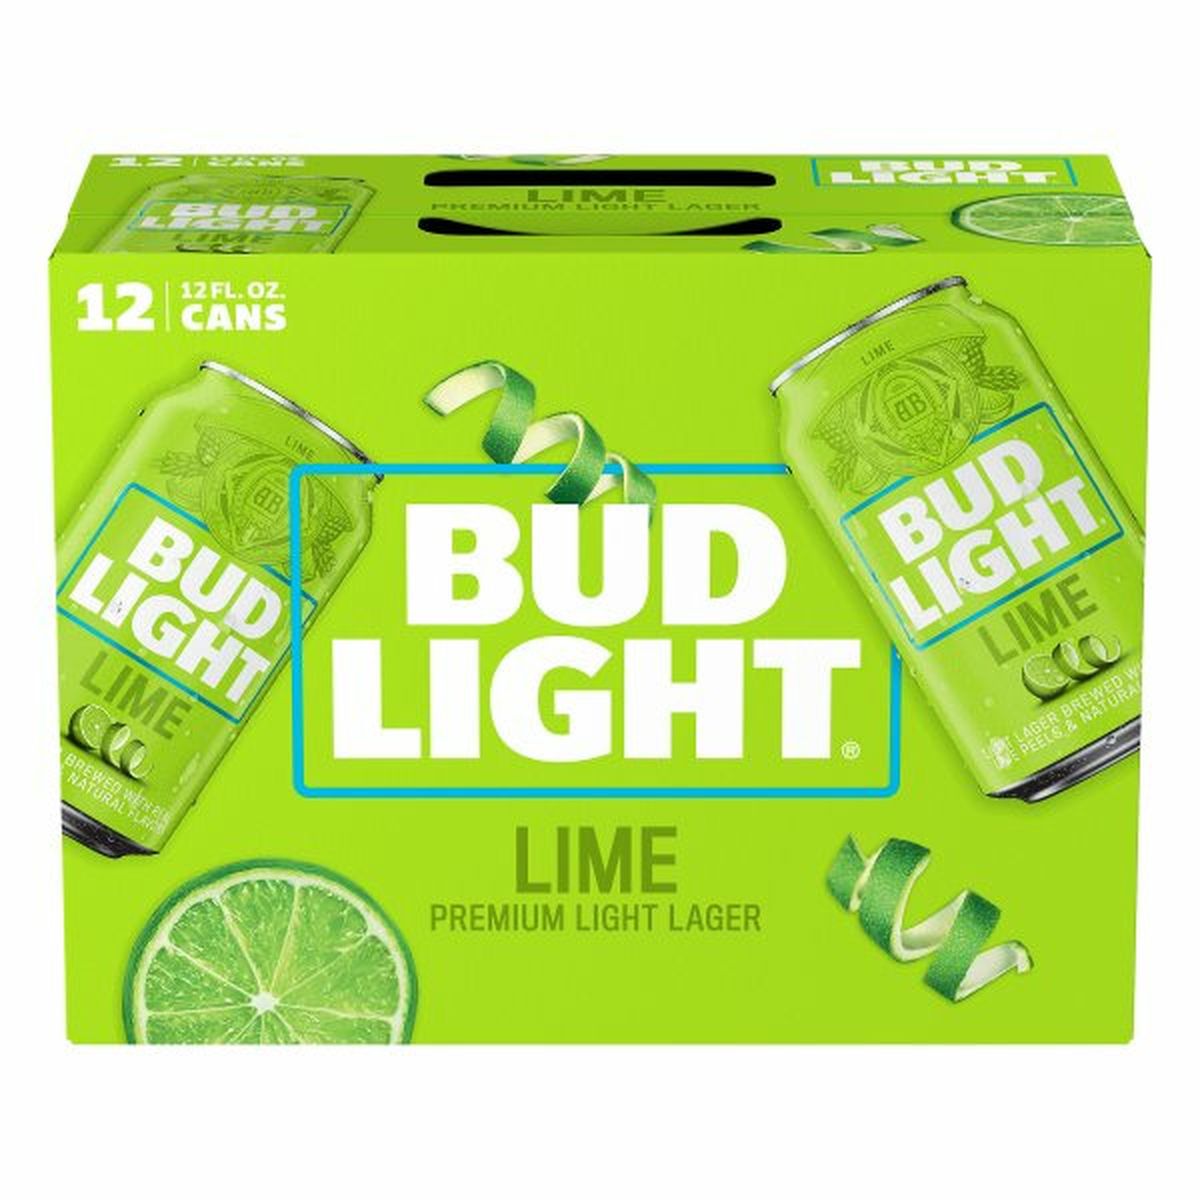 Calories in Bud Light Lime Lager 12/12 oz cans